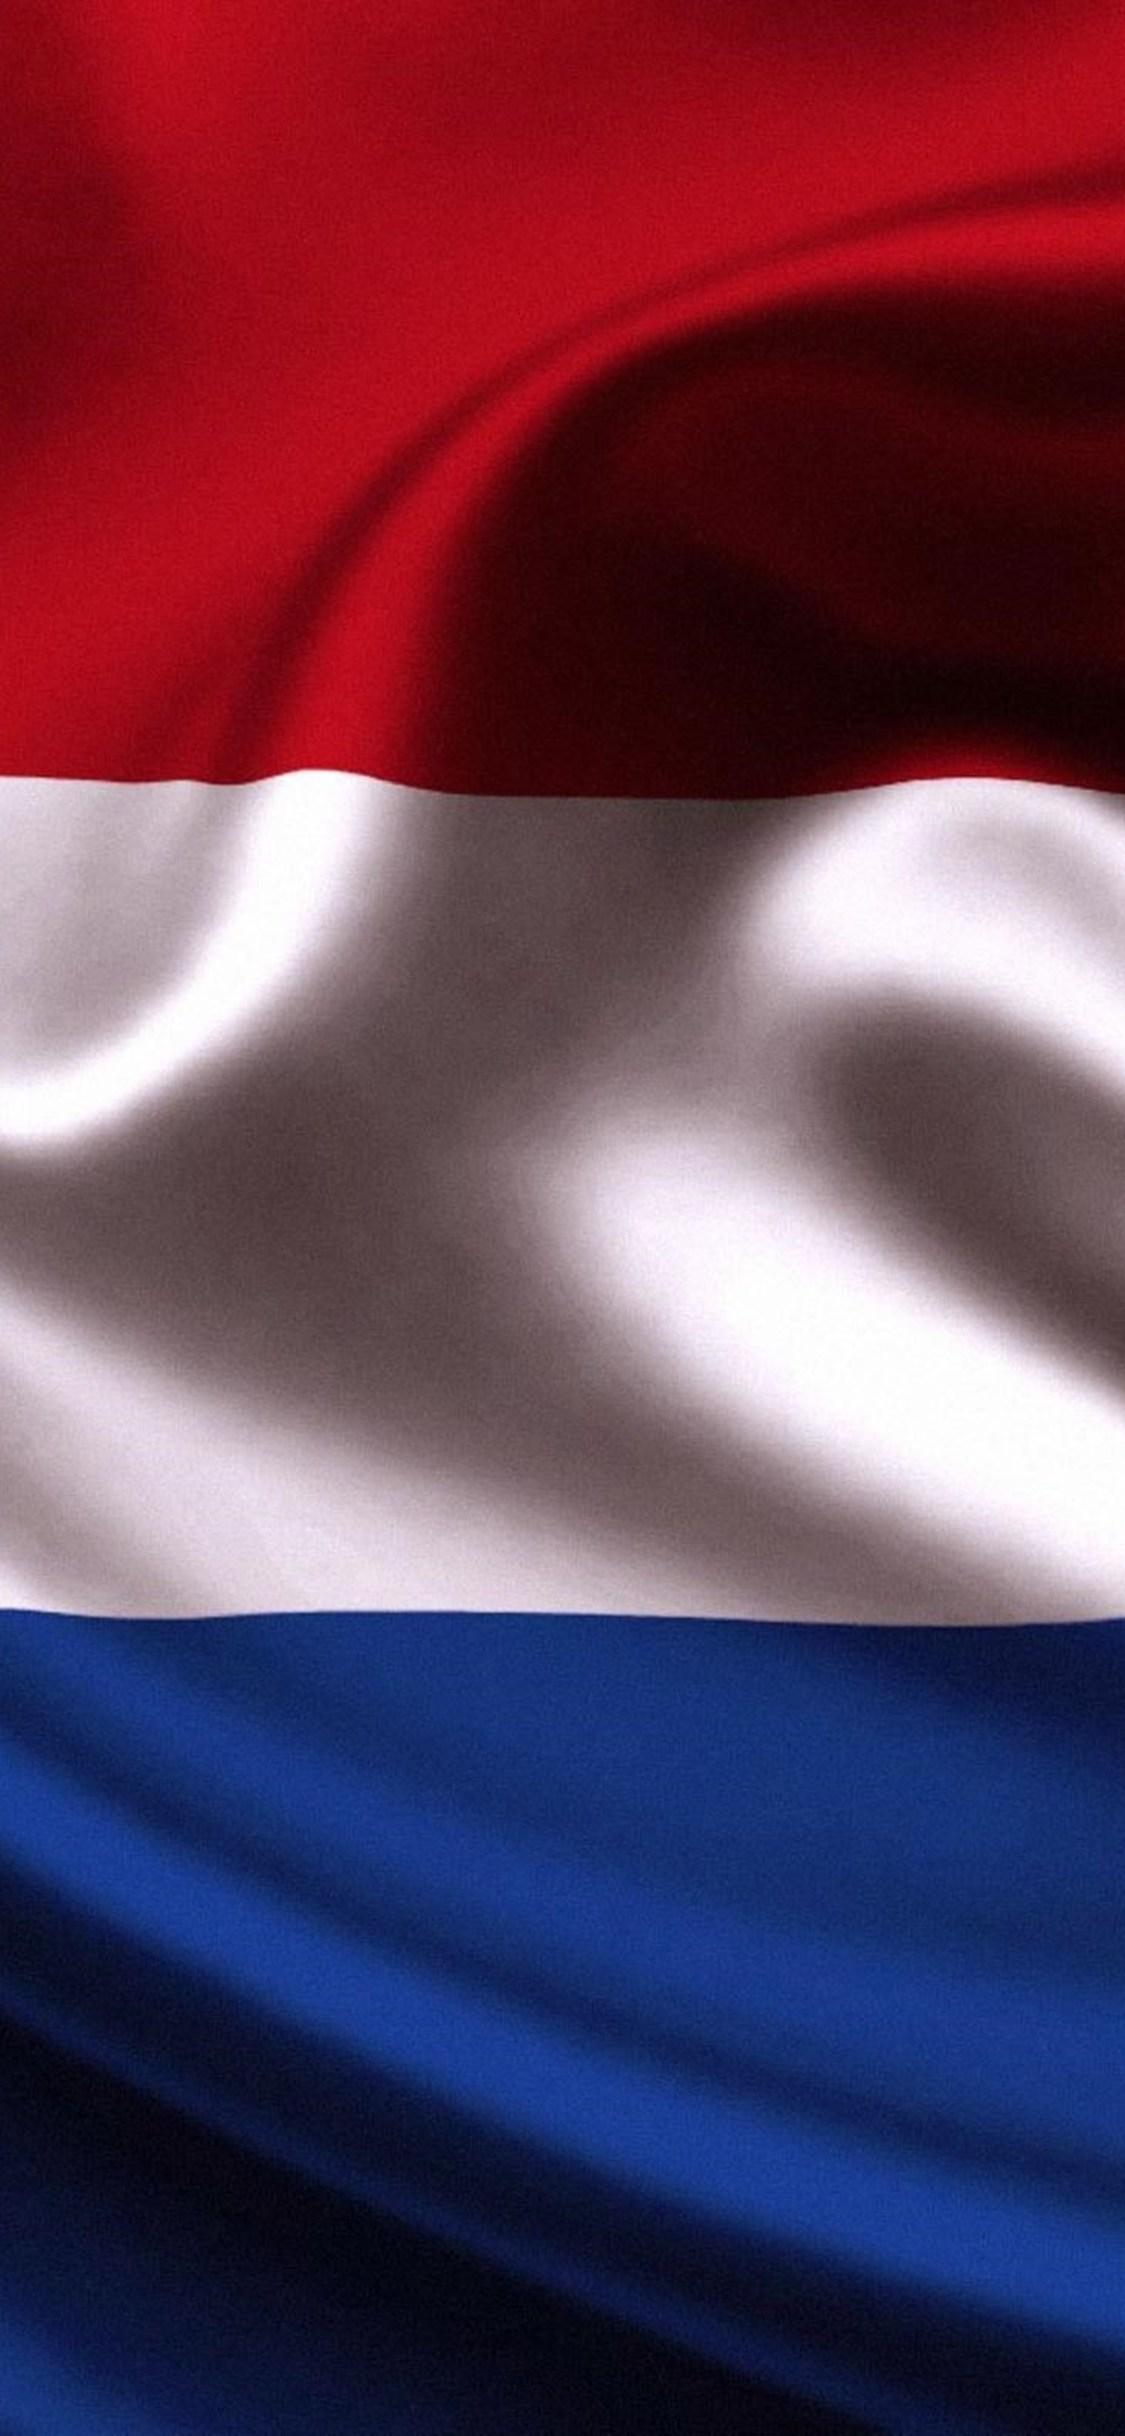 Netherlands Flag Iphone XS,Iphone 10,Iphone X HD 4k